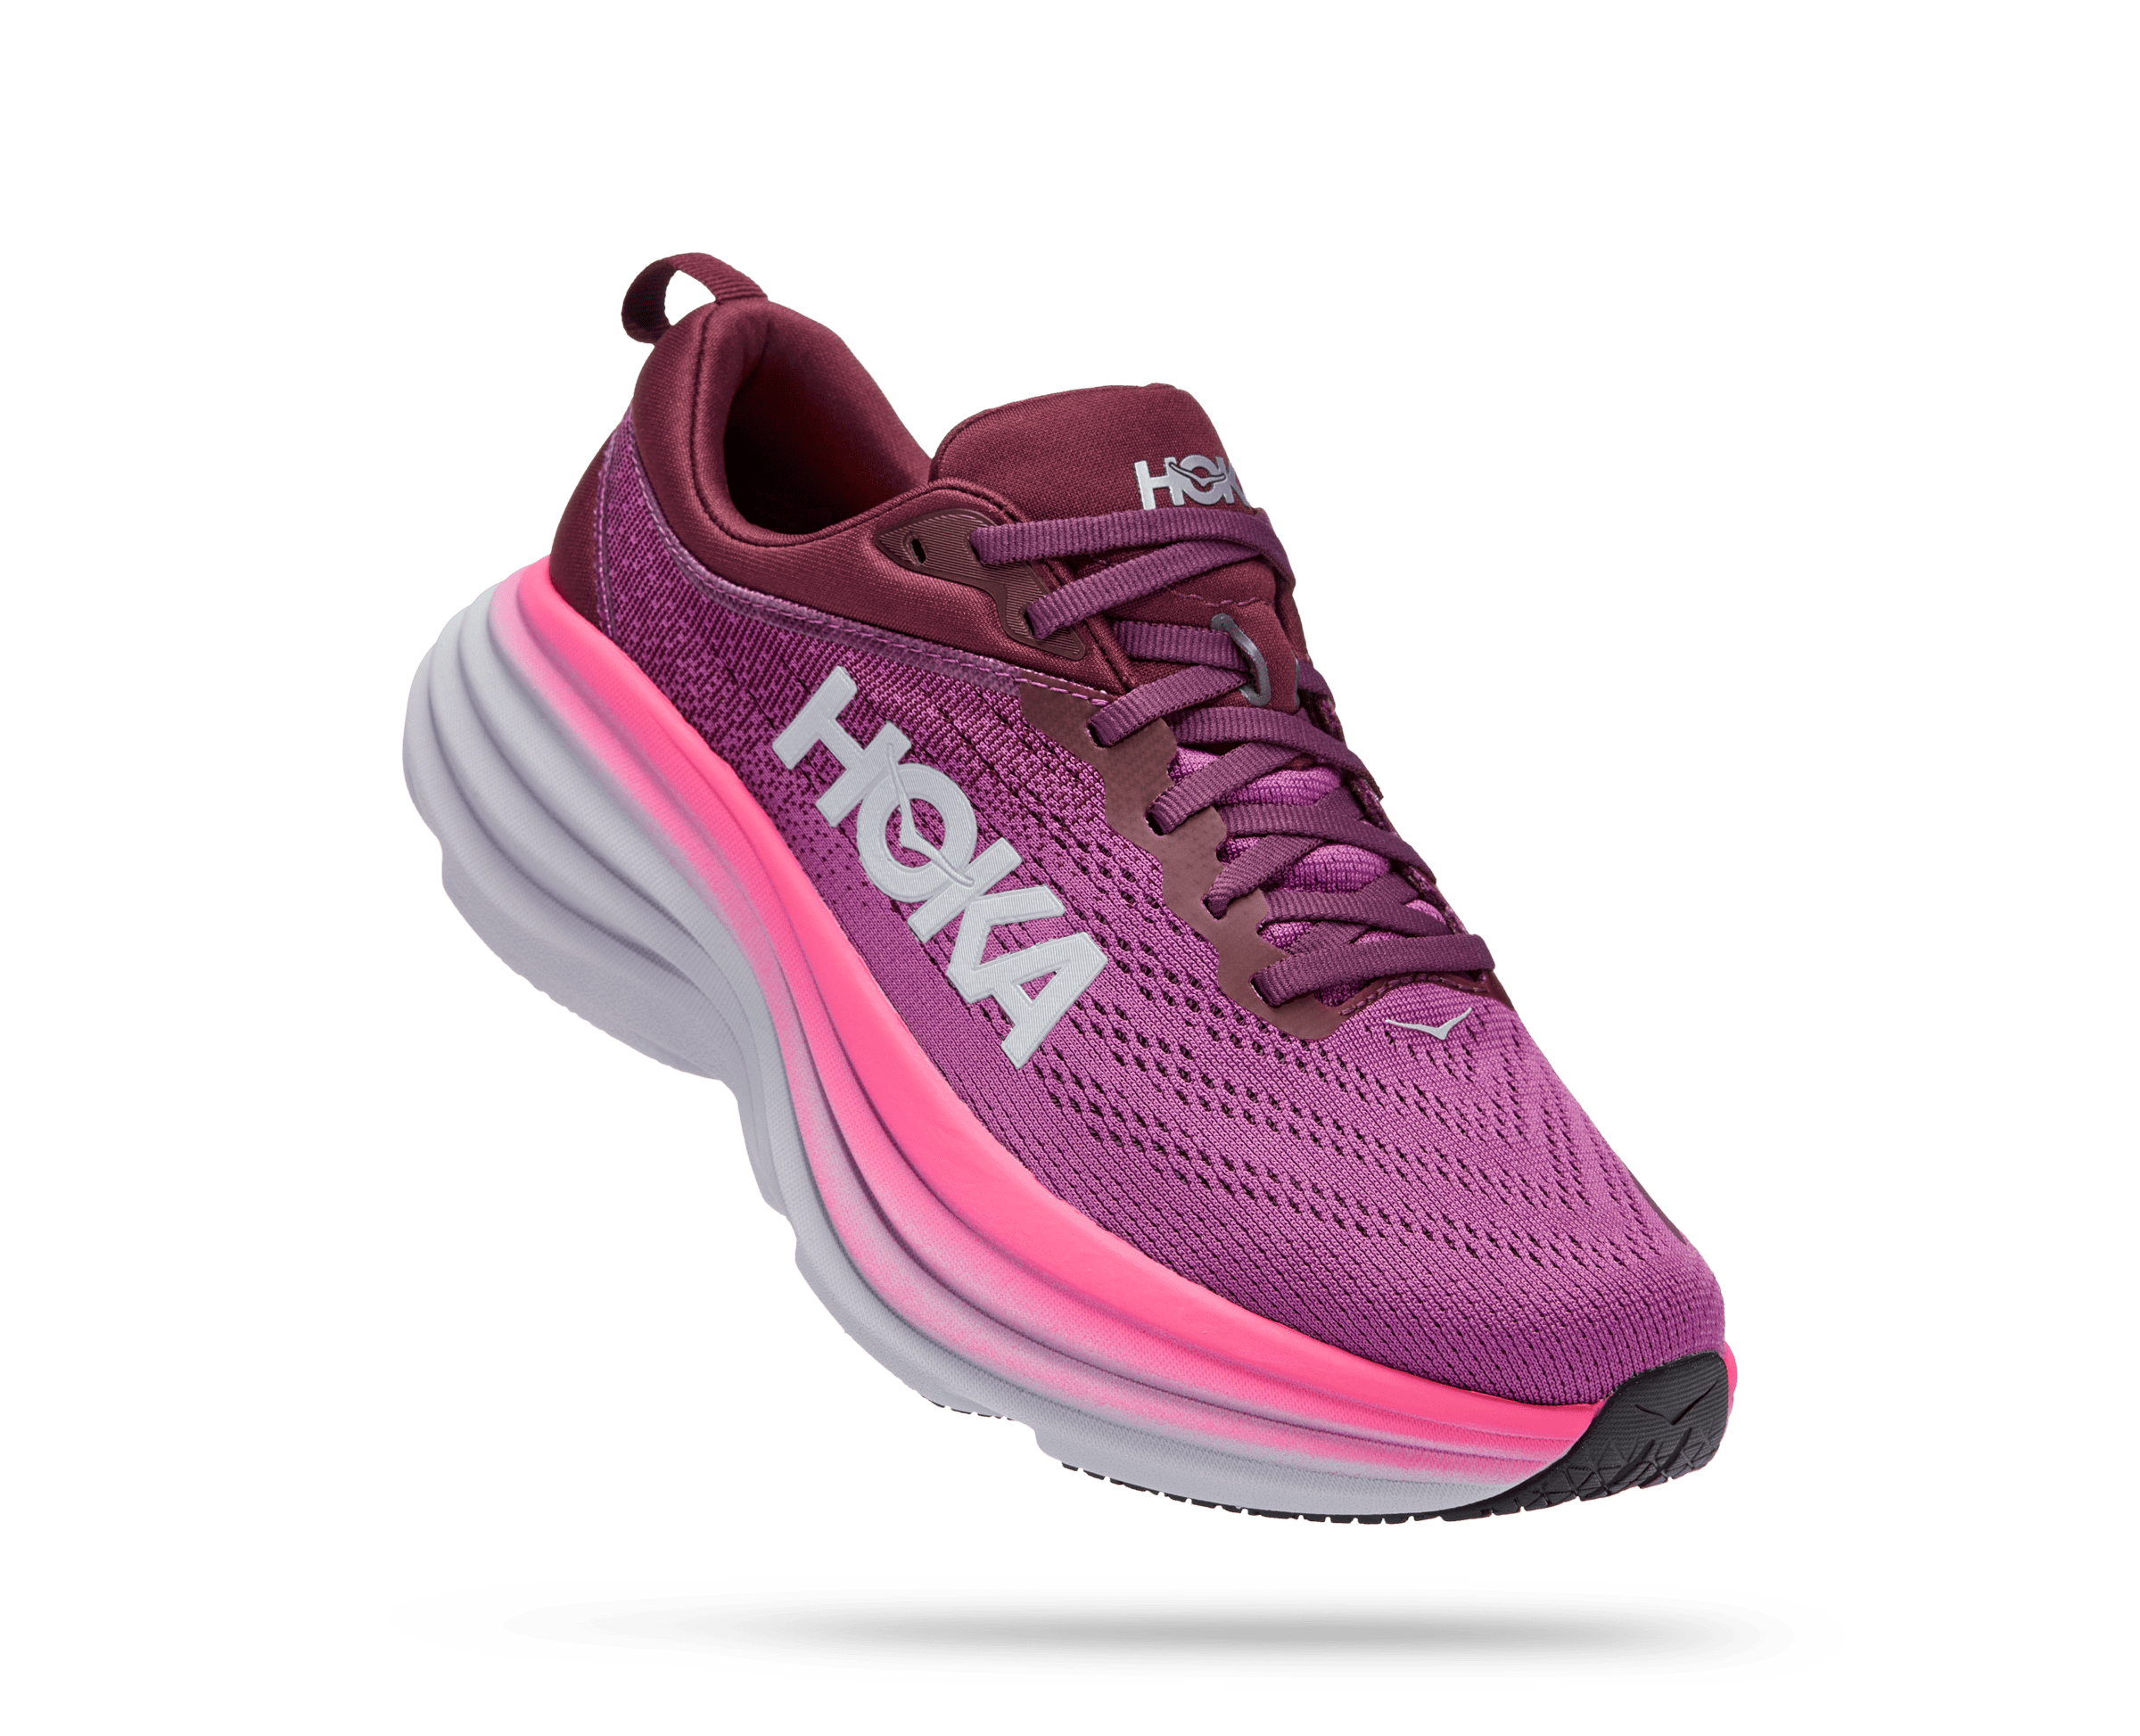 Front angle view of the Women's Bondi 8 in Beautyberry/Grape Wine